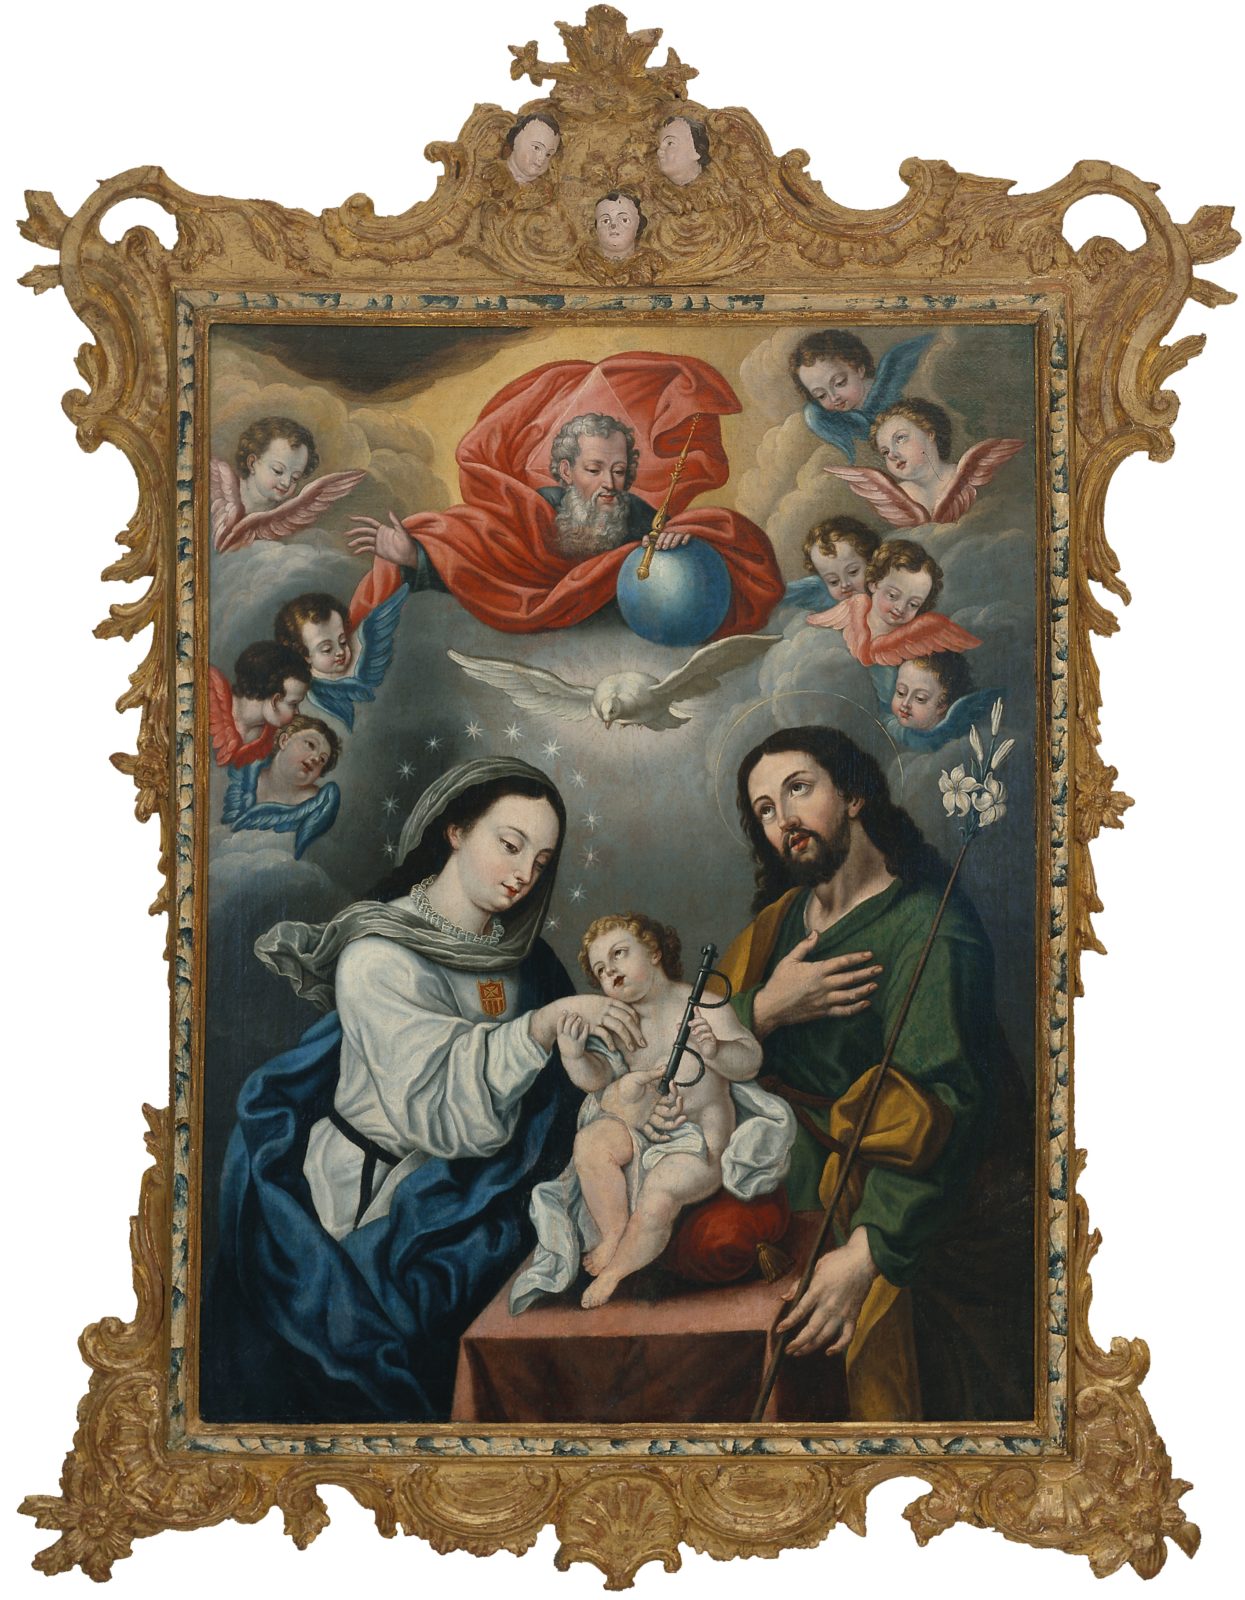 A painting depicting the Christ Child holding a yolk and is flanked by the Virgin Mary and Saint Joseph. Above is God and a dove, symbolizing the Holy Spirit.